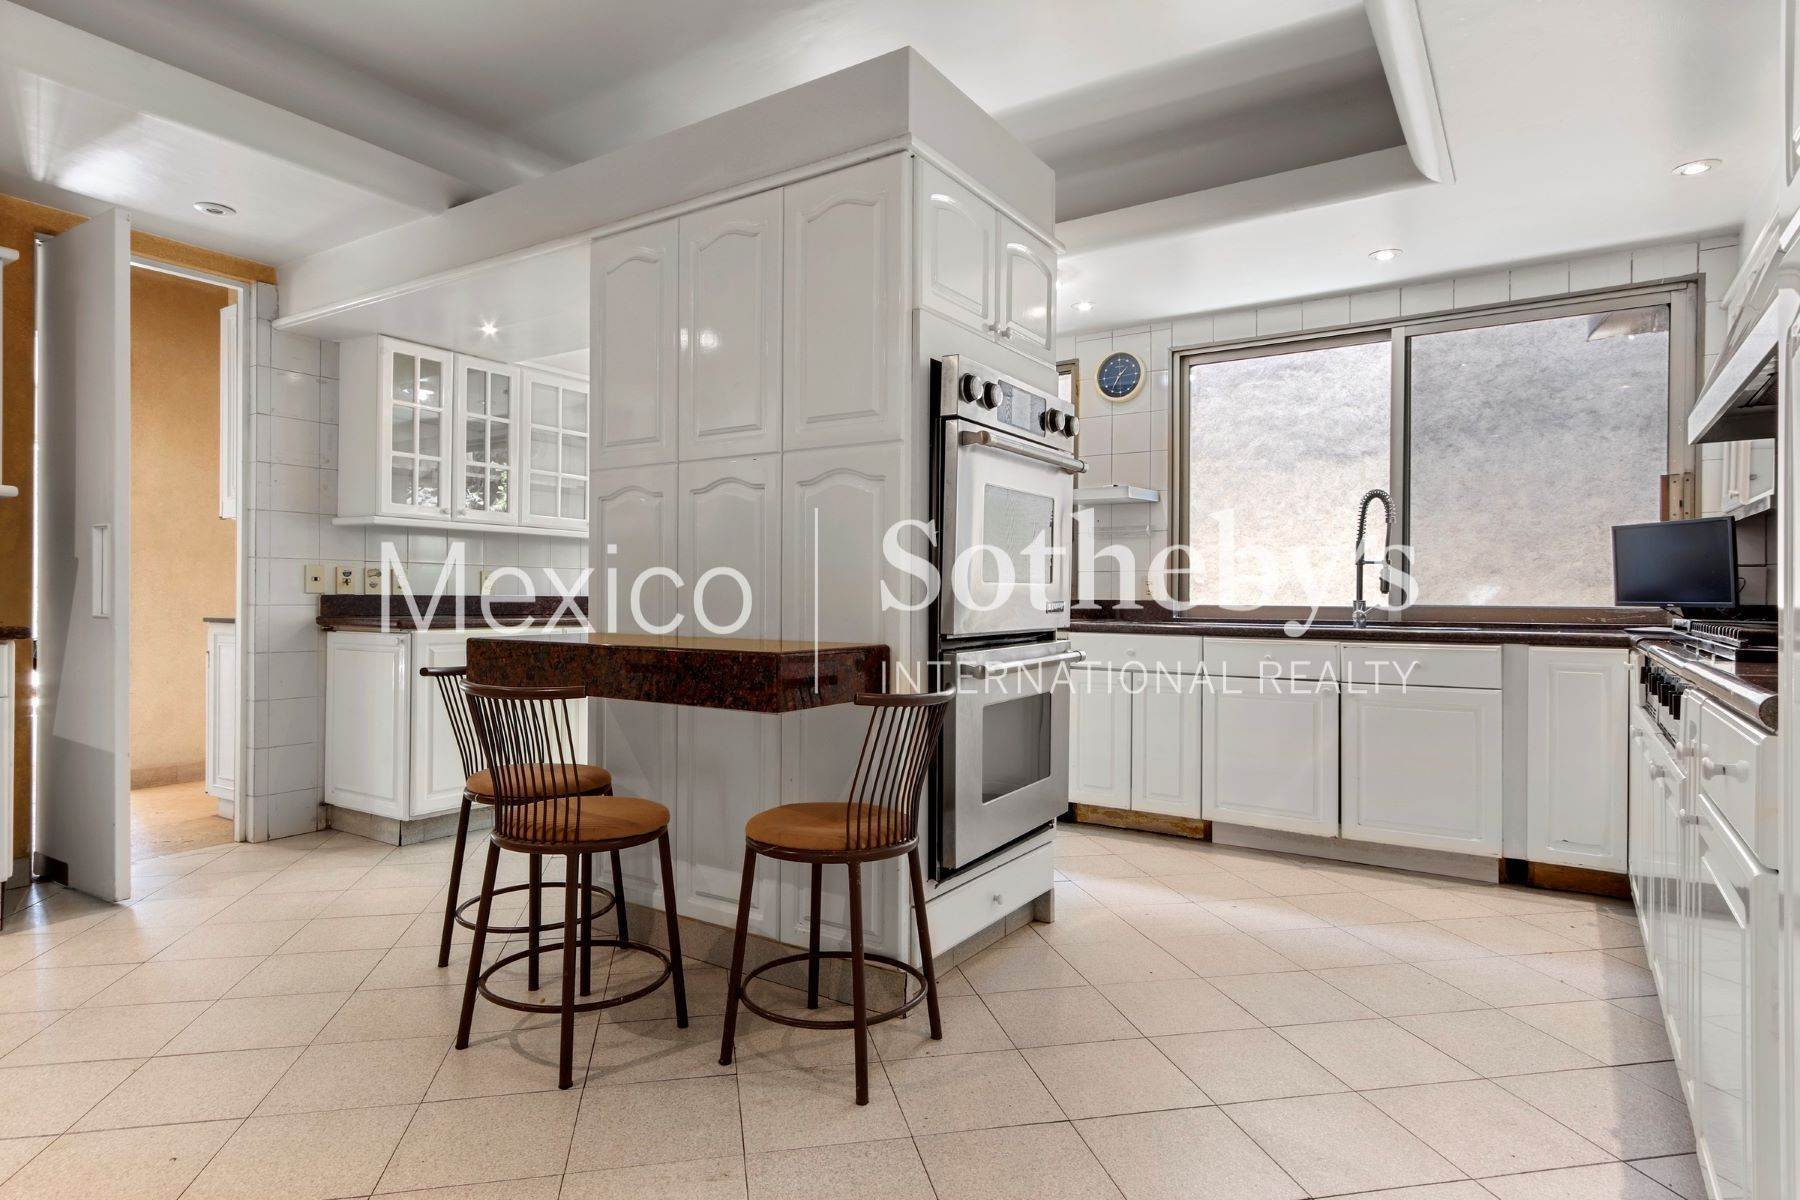 10. Single Family Homes for Sale at Sierra Paracaima 925, Lomas de Chapultepec Lomas De Chapultepec, Other Areas In Mexico 11000 Mexico